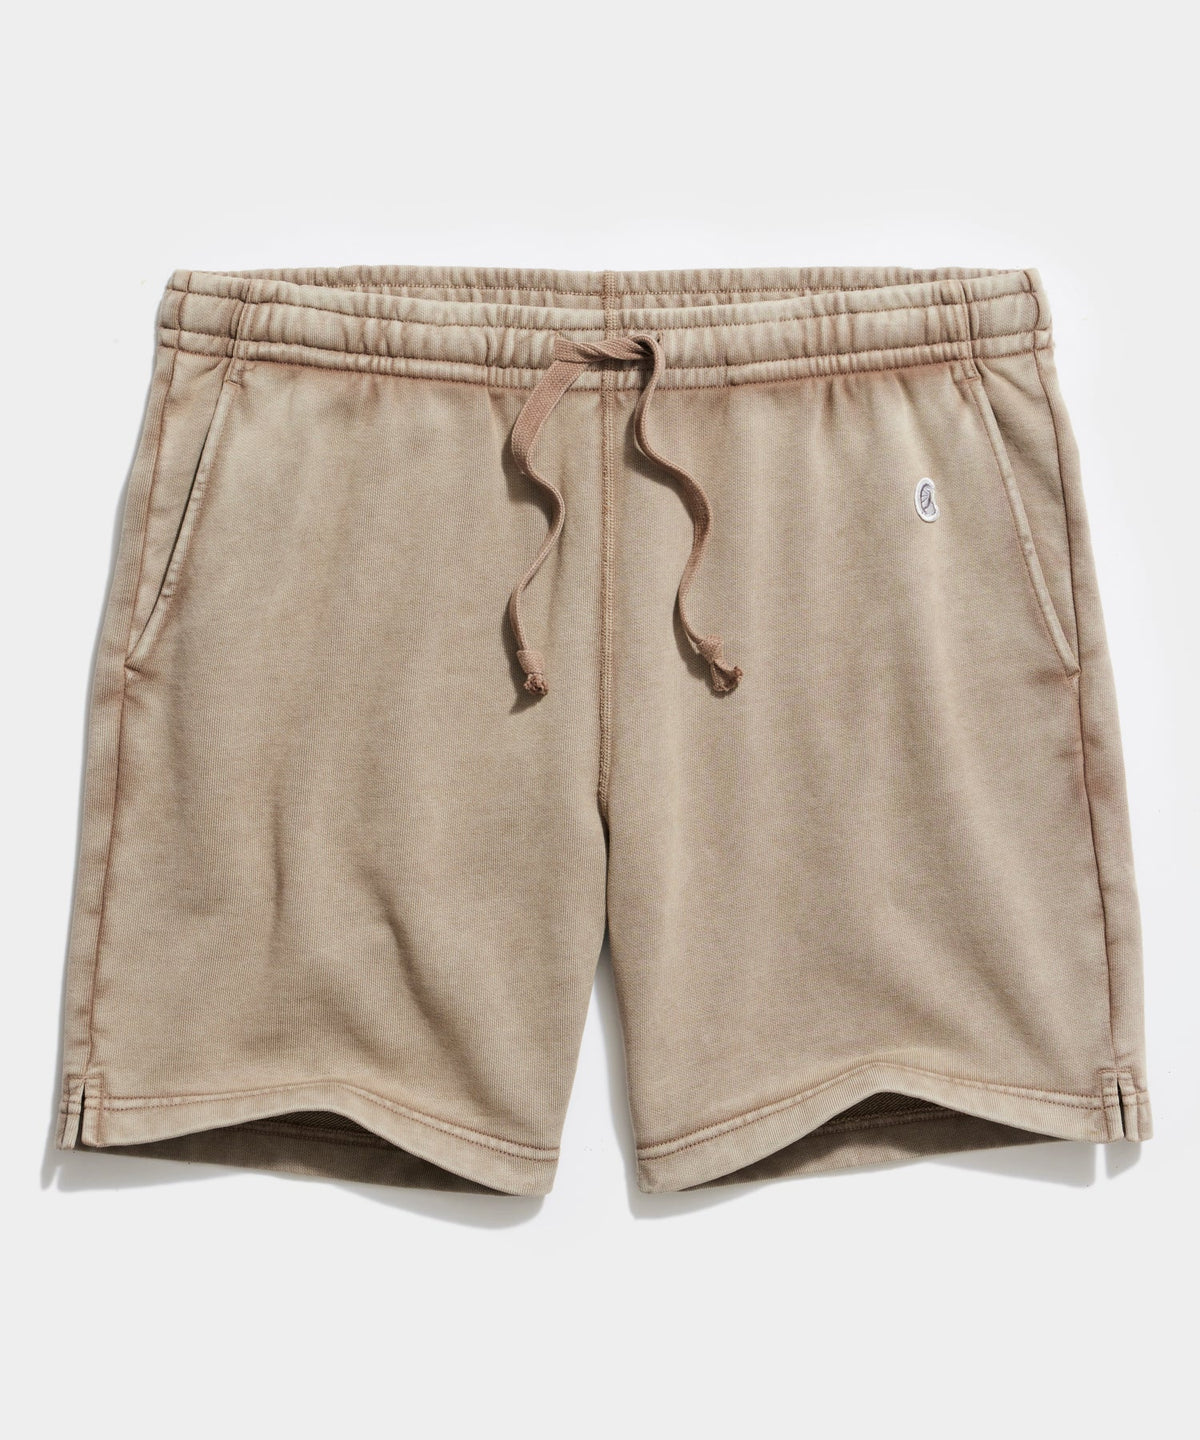 Sun-Faded 7" Midweight Warm Up Short in Toasted Almond